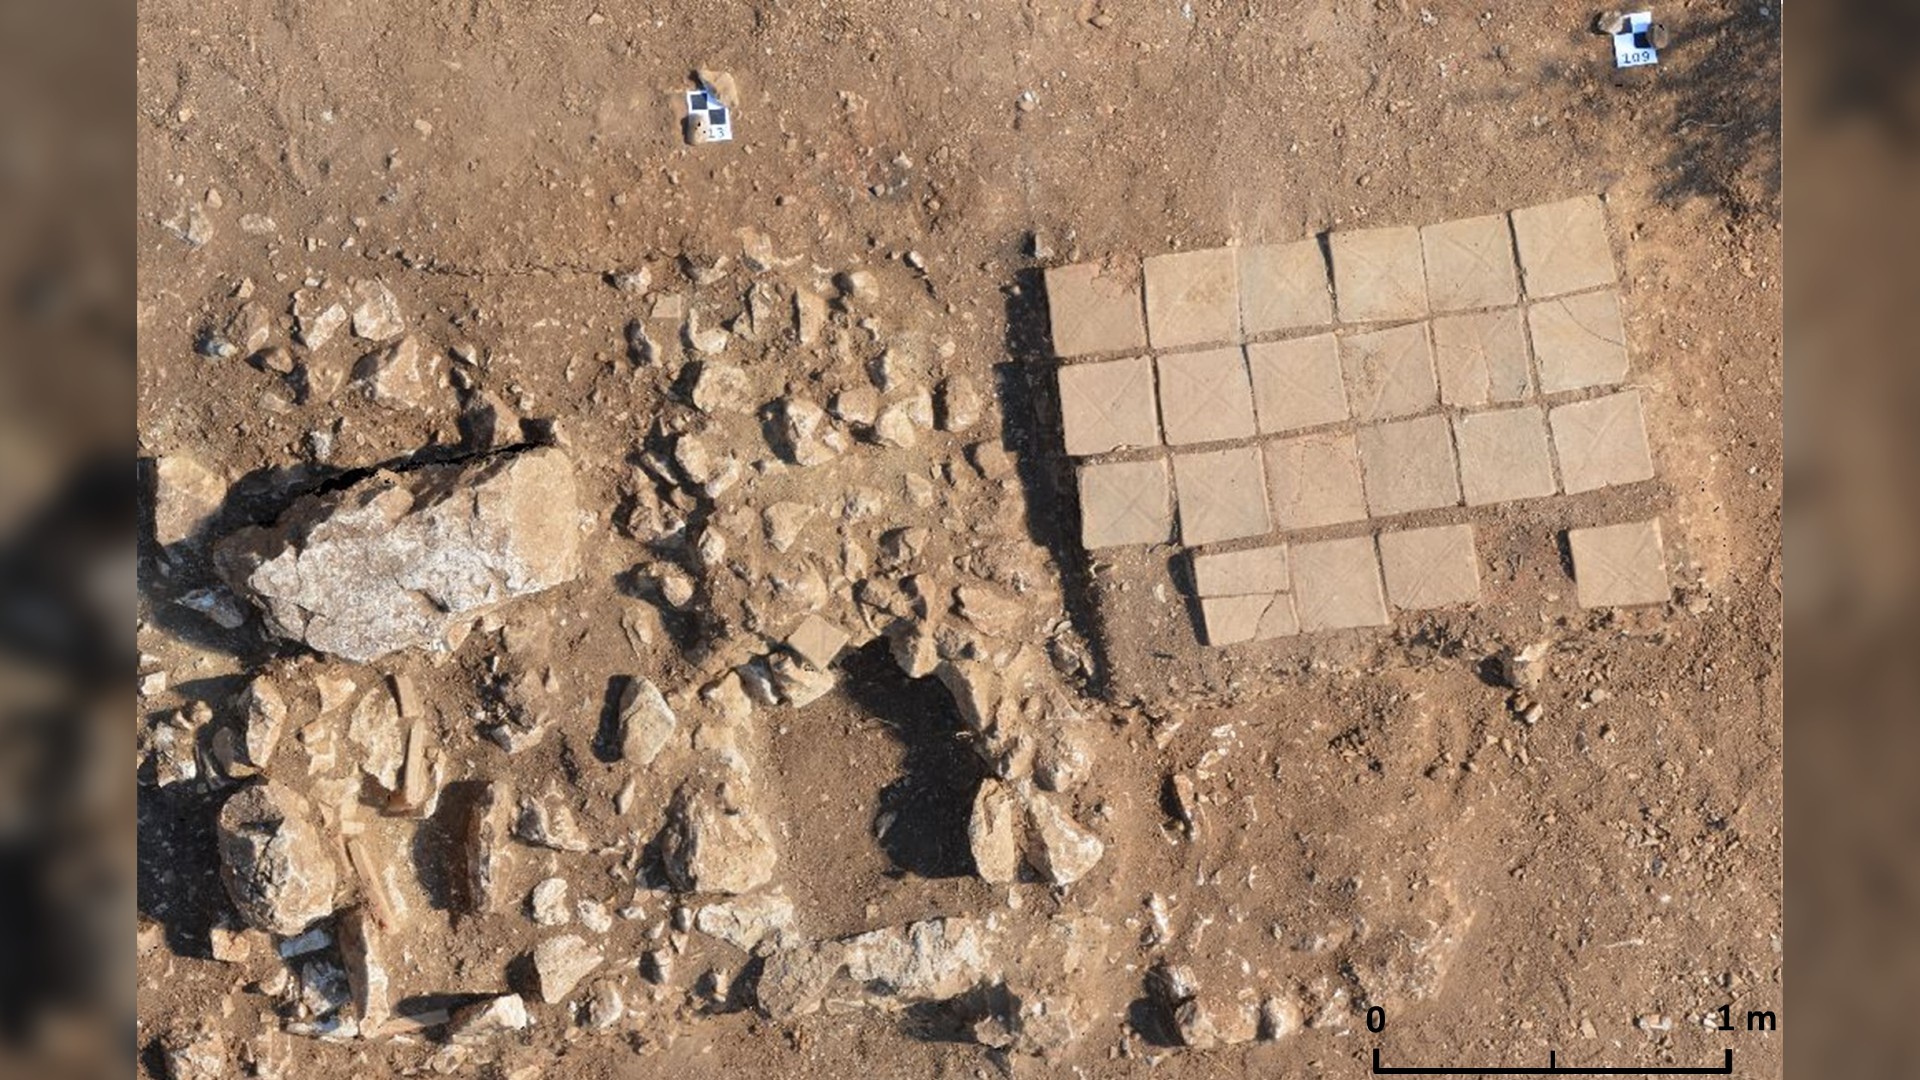 A photo of the cremation grave with bricks (right) next to two later graves (left).